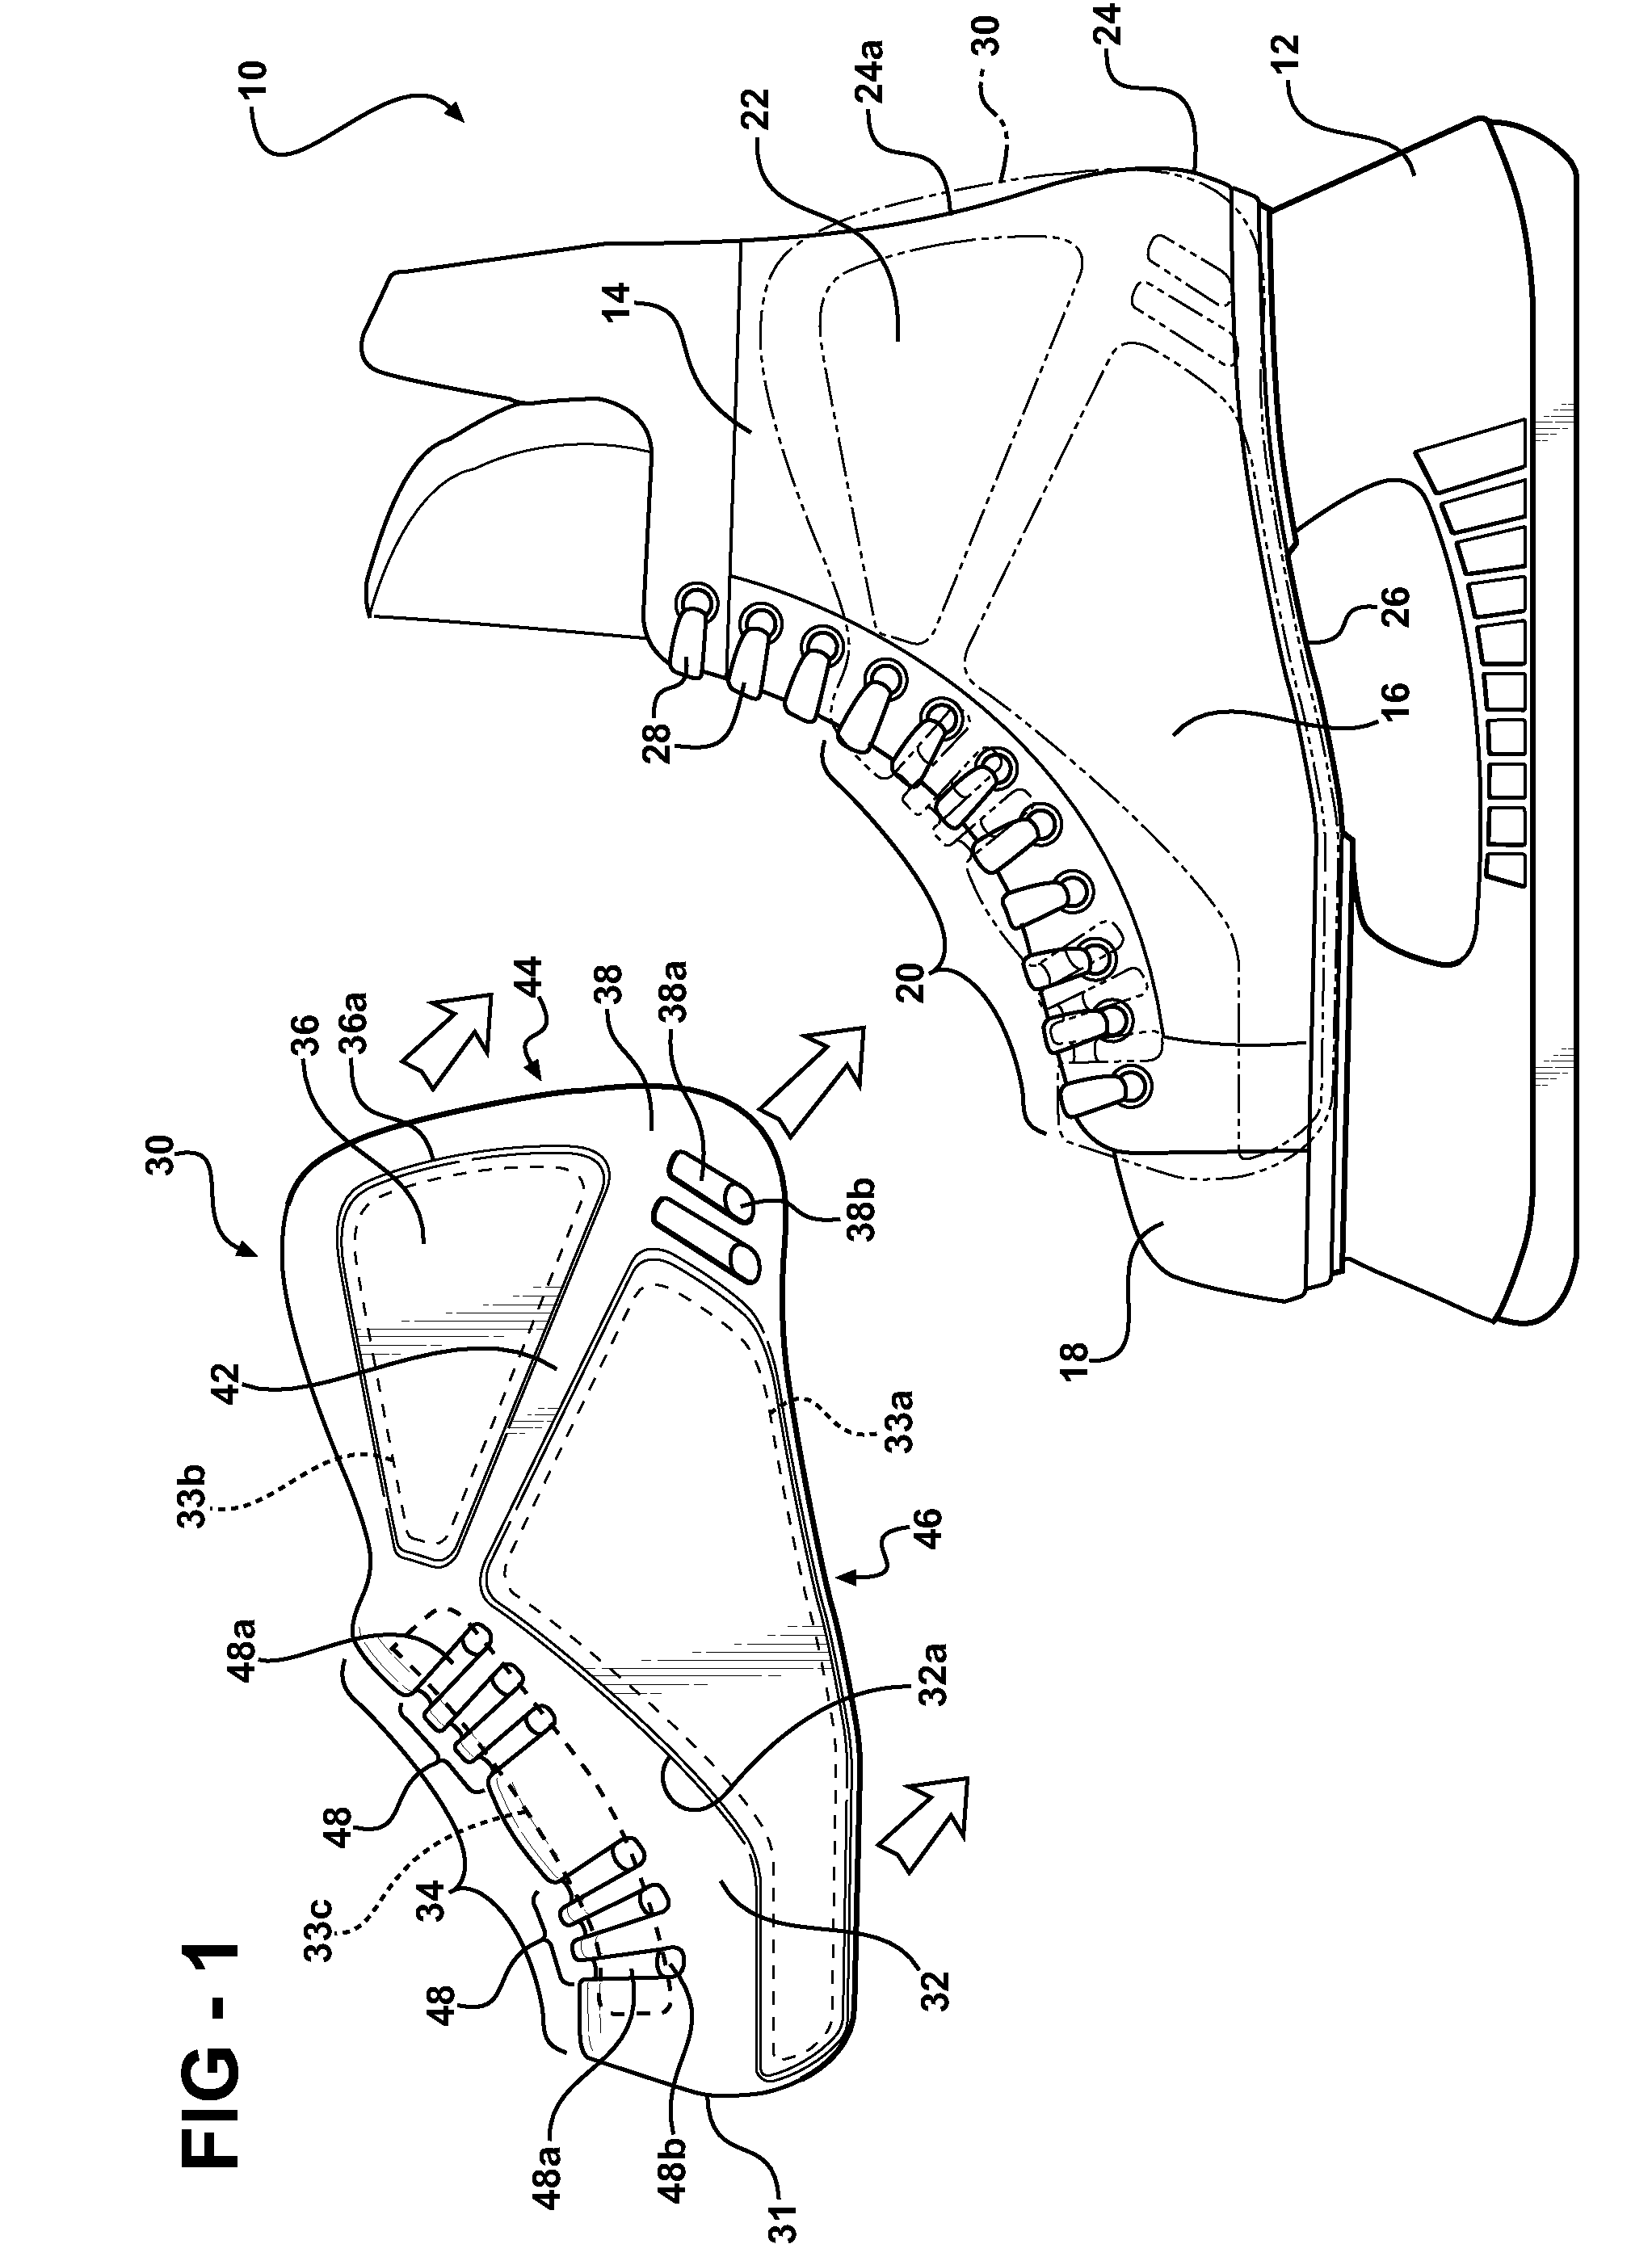 Protective cover for hockey skate boot